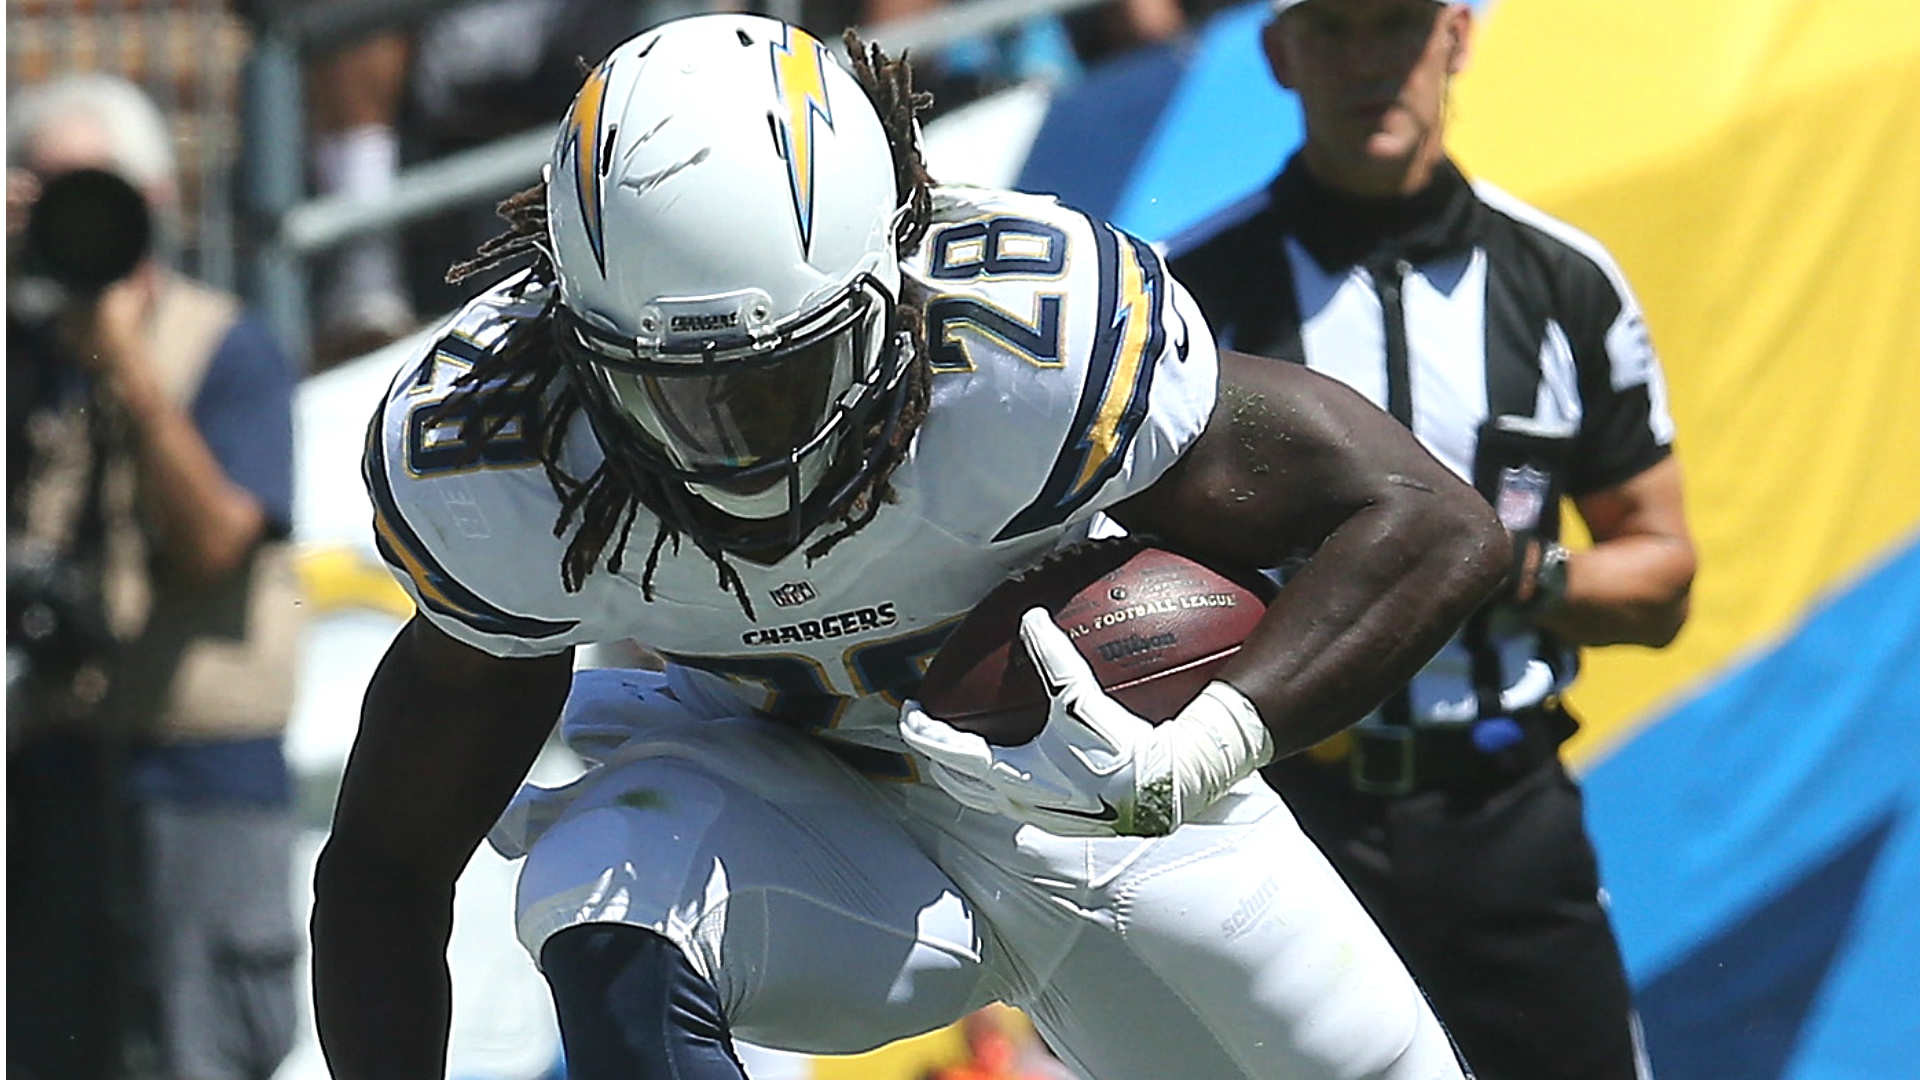 1920x1080 Ameer Abdullah outduels Melvin Gordon, but Chargers beat Lions | NFL |  Sporting News